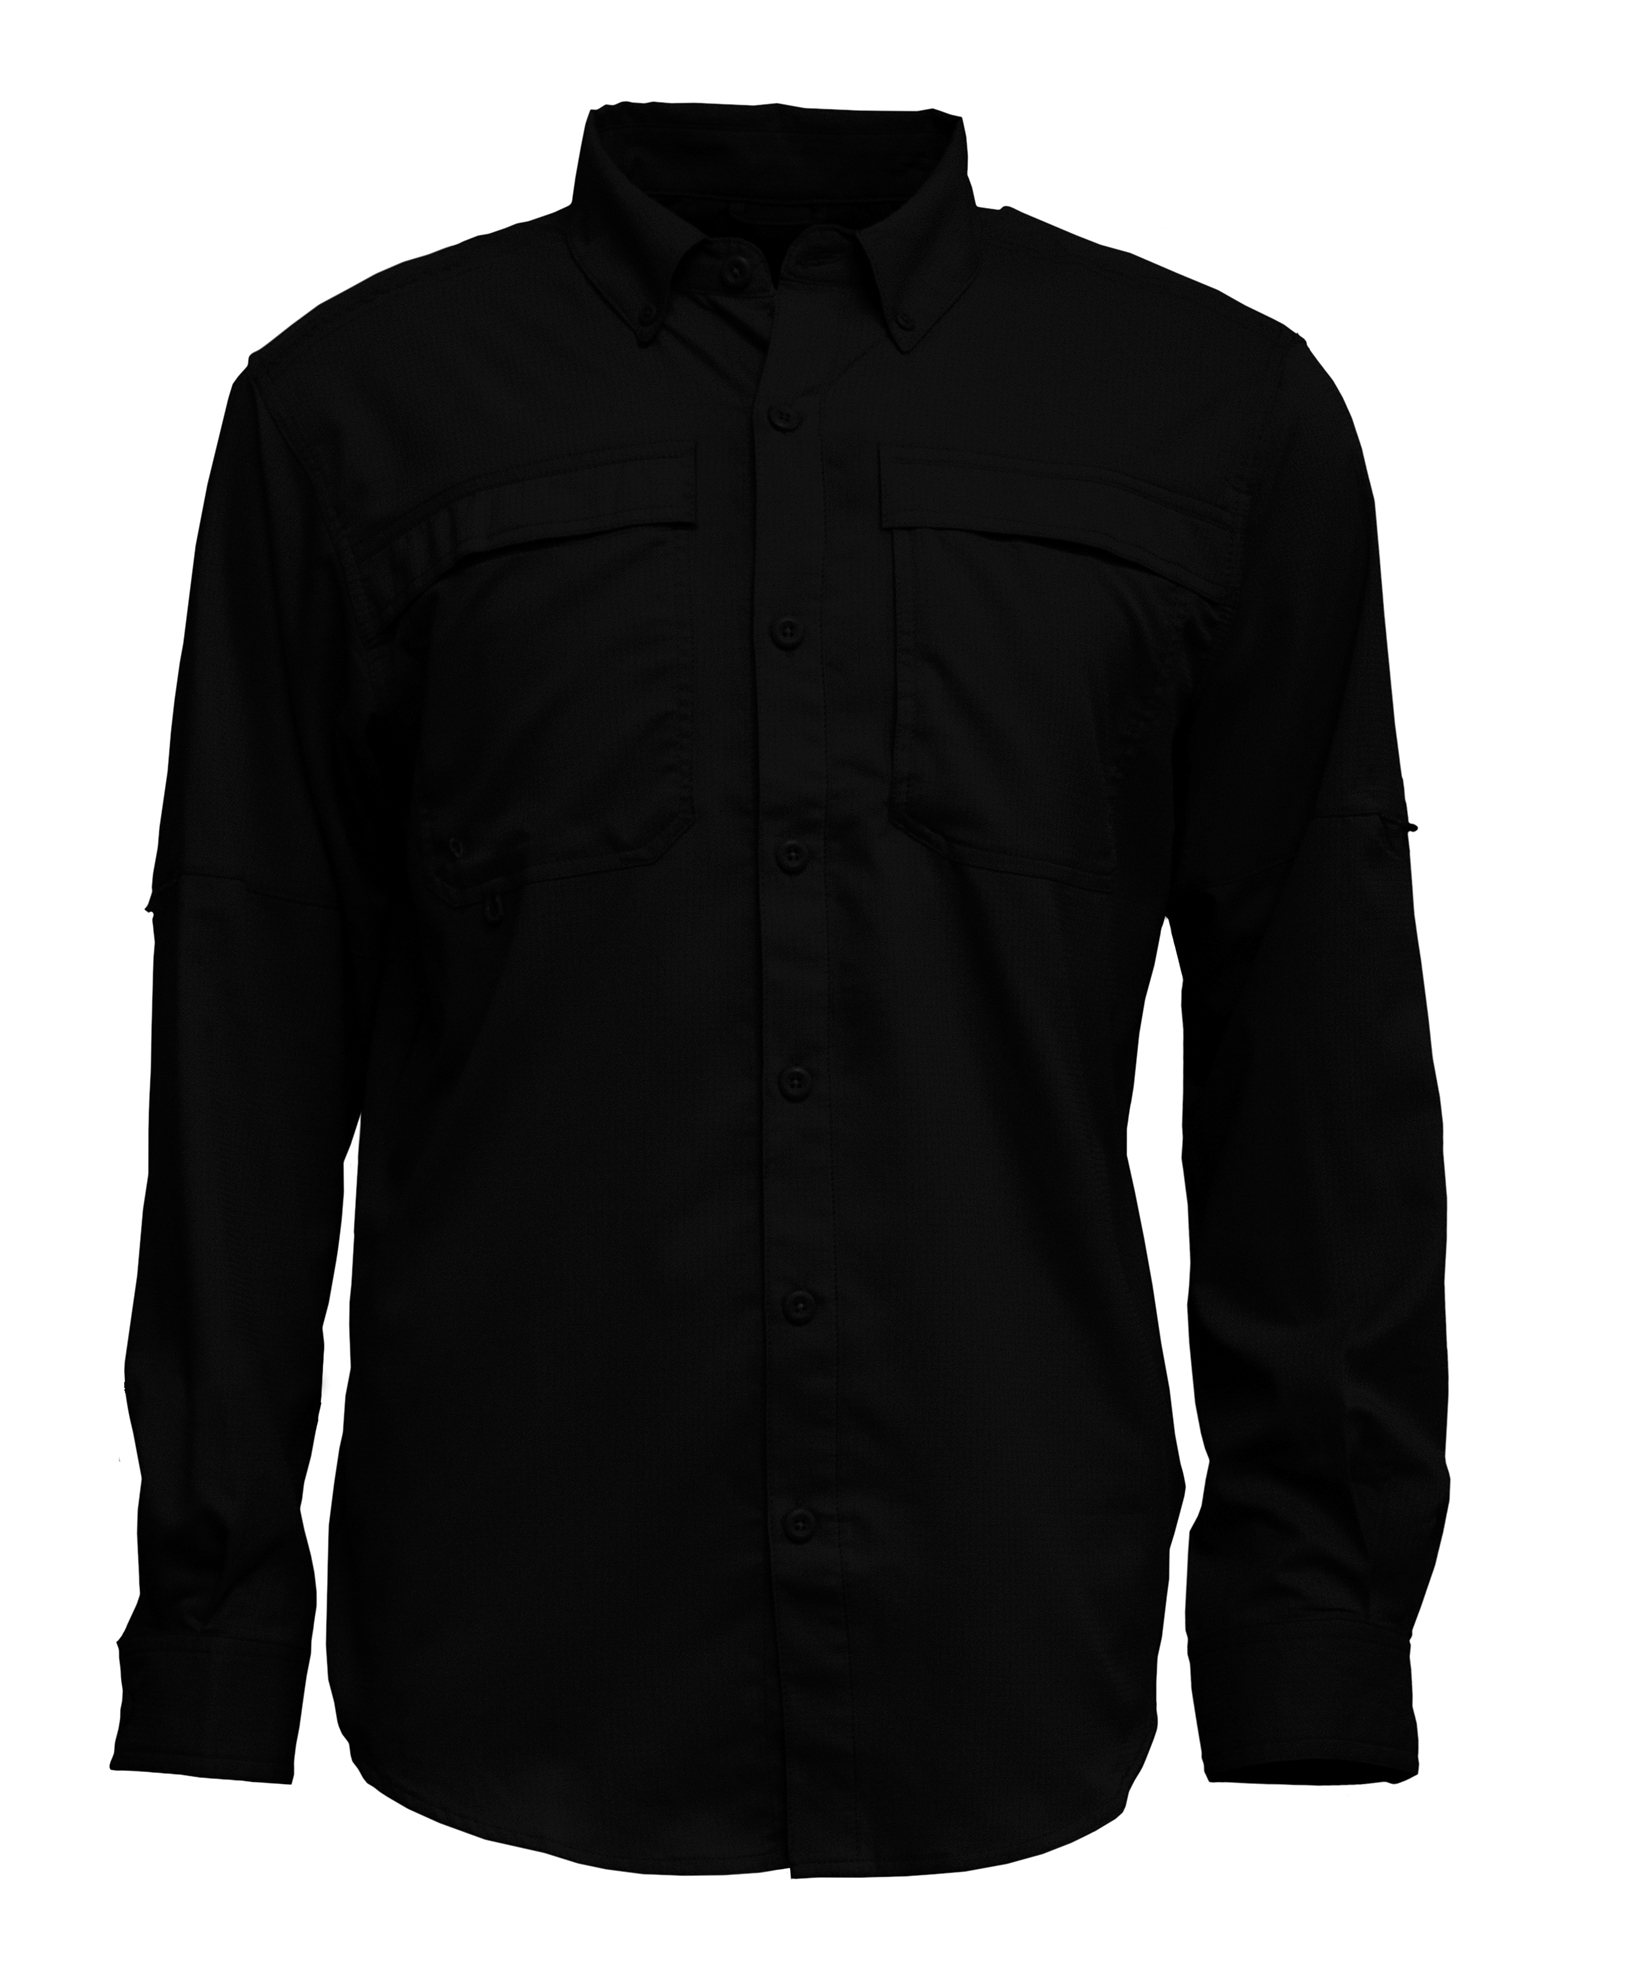 https://www.nyfifth.com/category/20220718/baw-athletic-wear-3300-adult-long-sleeve-fishing-shirt-with-button-down-collar_BLACK.jpeg